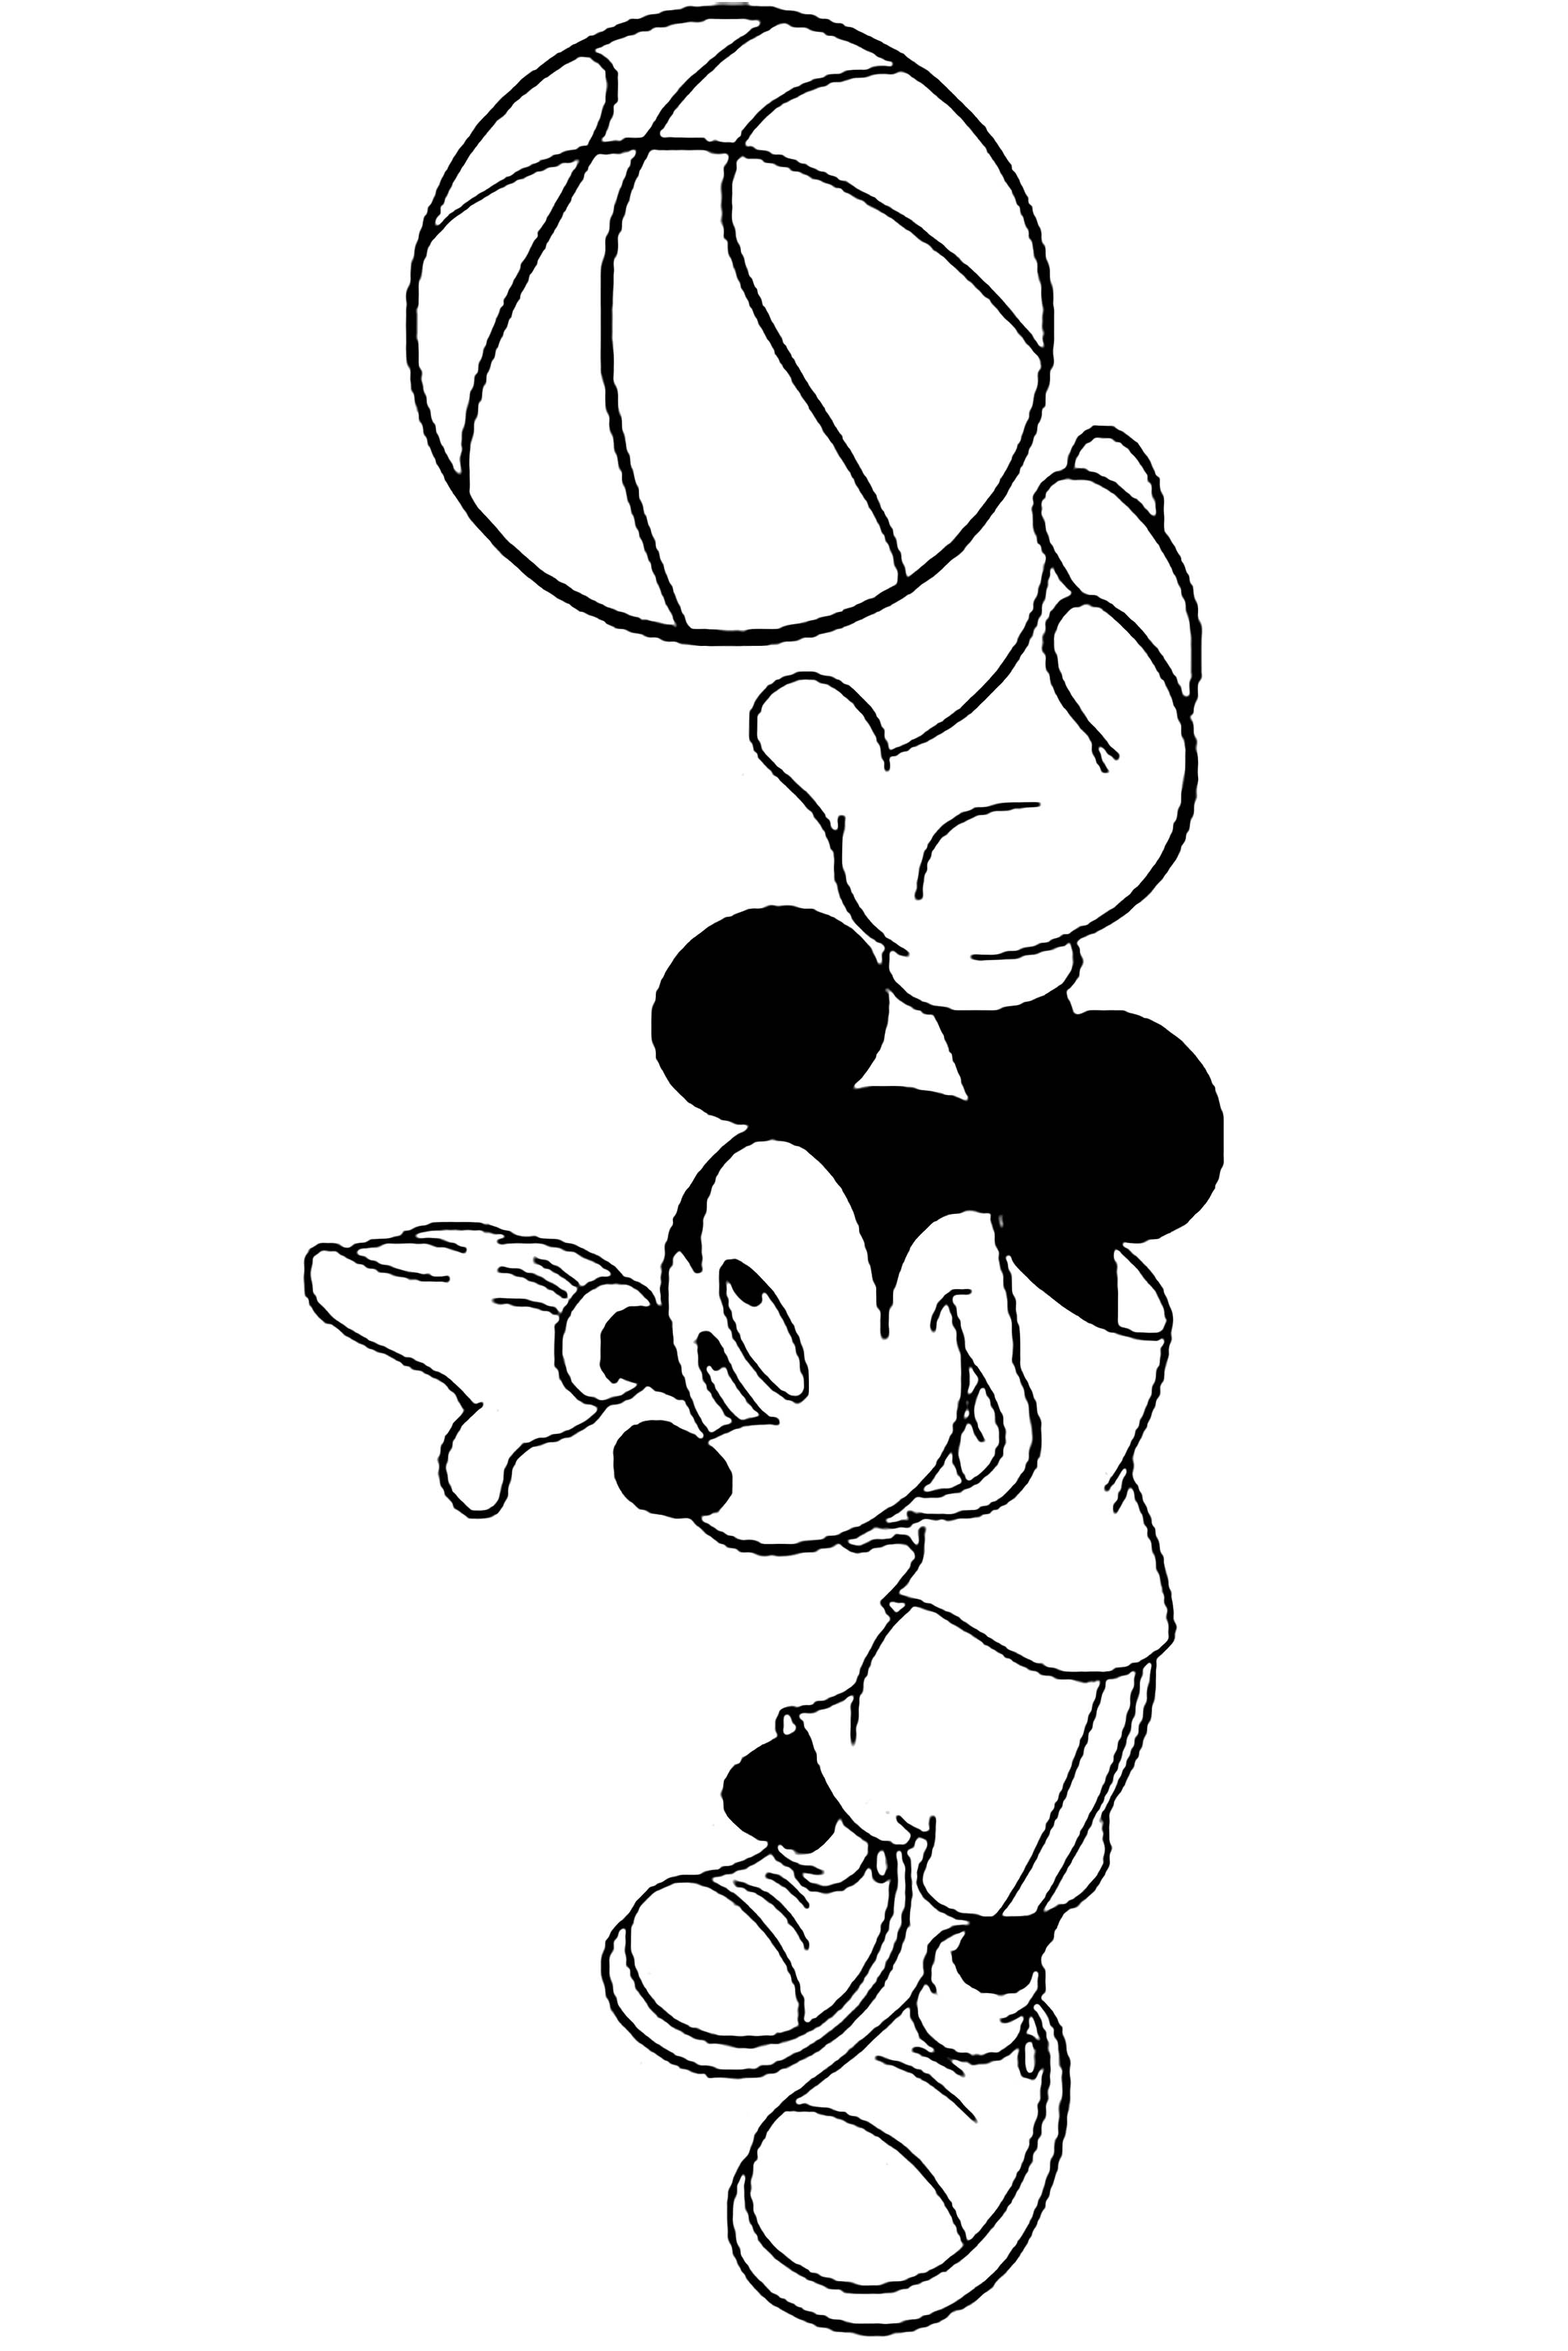 basketball-coloring-pages-to-print-basketball-kids-coloring-pages